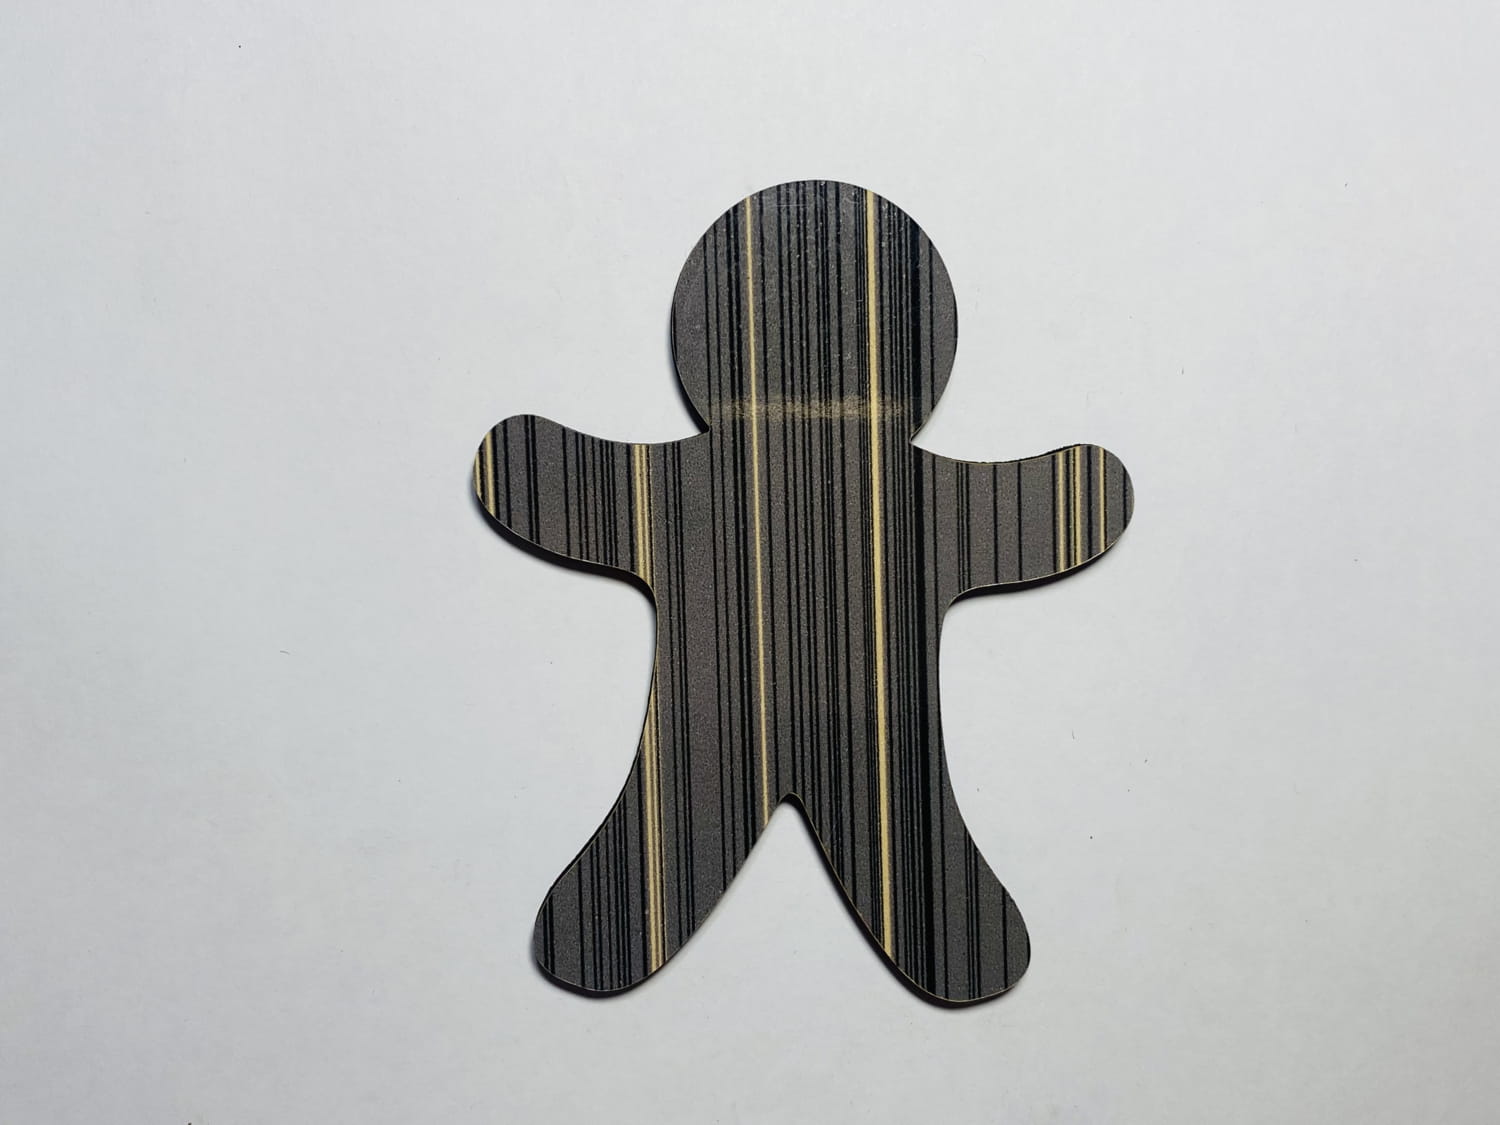 Laser Cut Gingerbread Man Cutout Unfinished Wood Shape Craft Free Vector